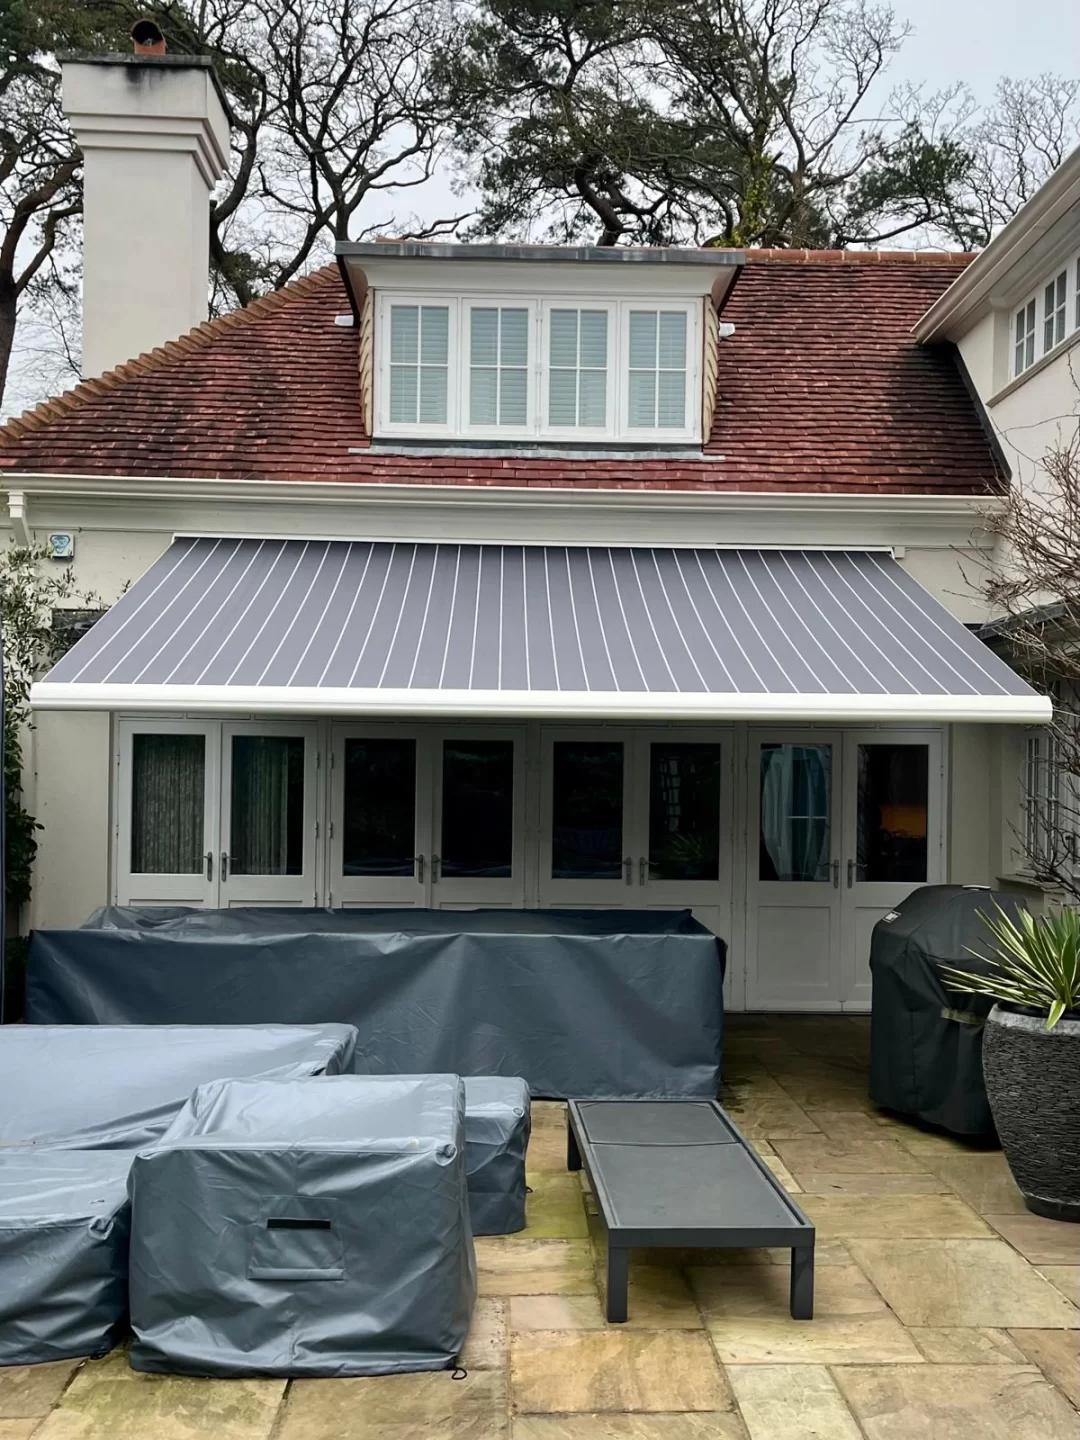 patio-and-garden-awnings